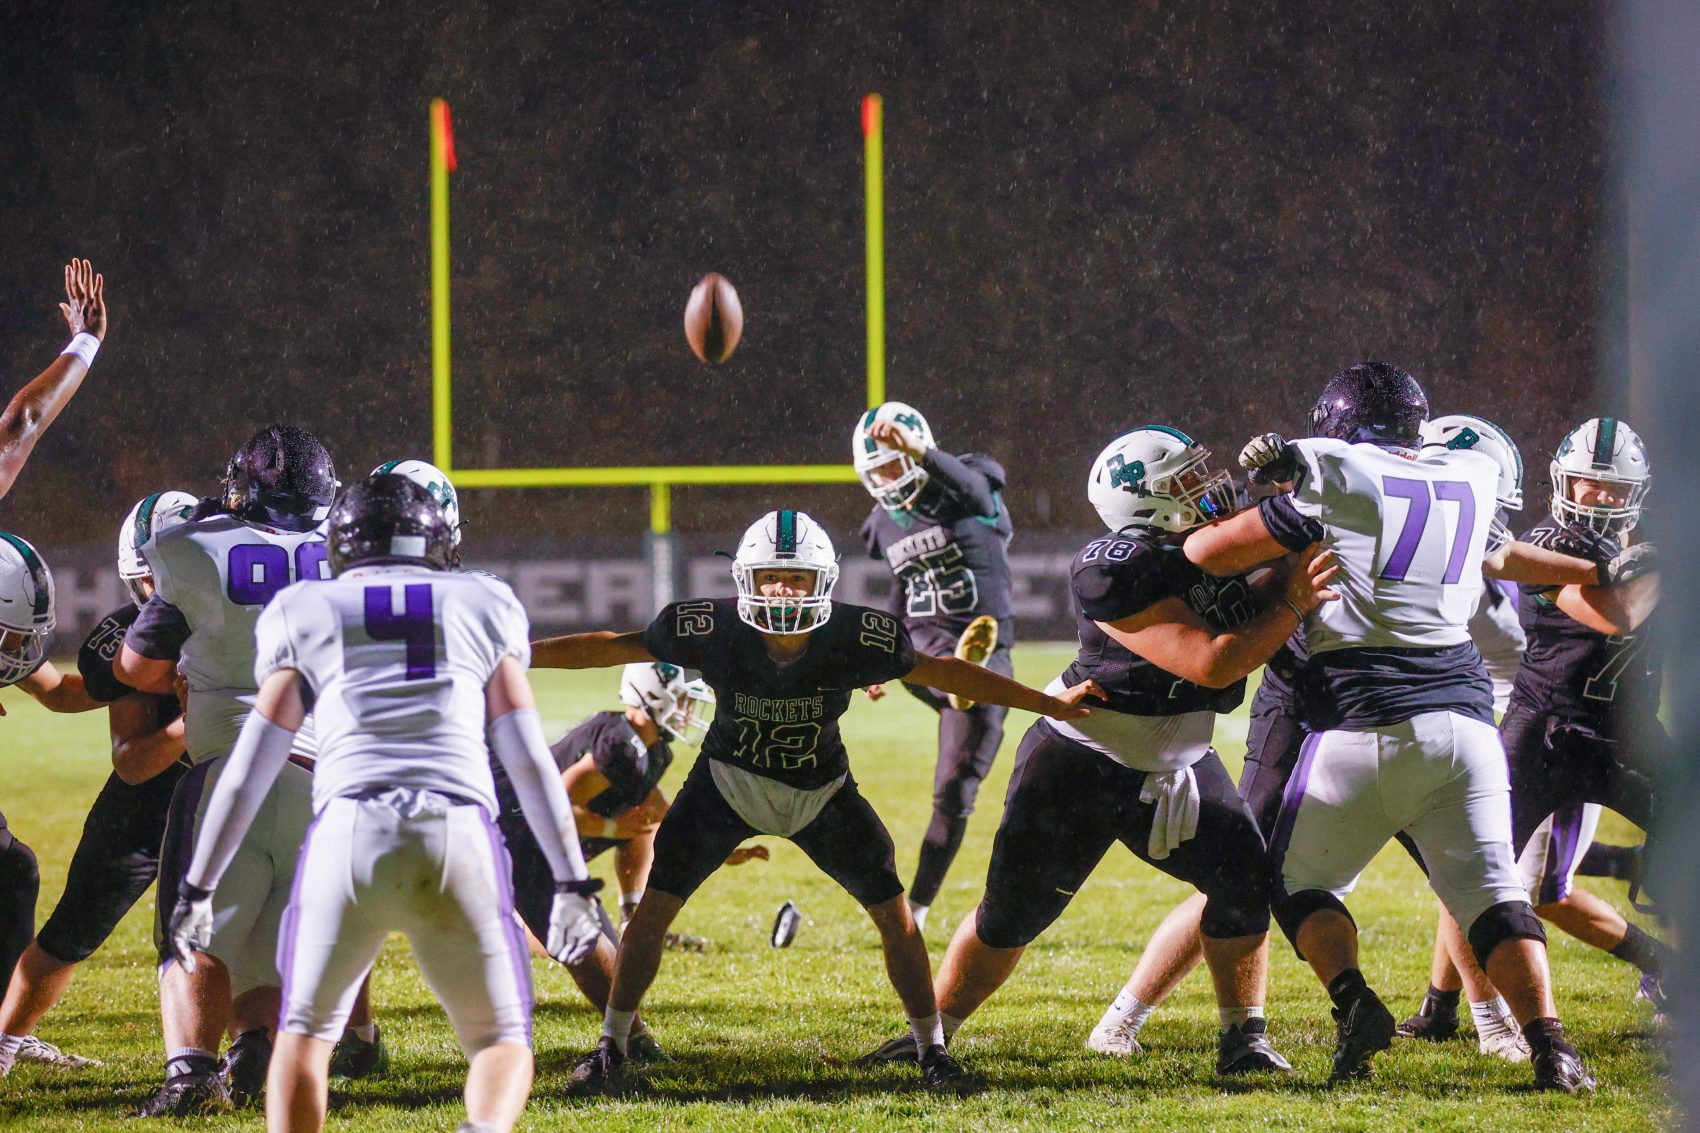 Reeths-Puffer makes quick work of Wyoming in OK-Green football matchup